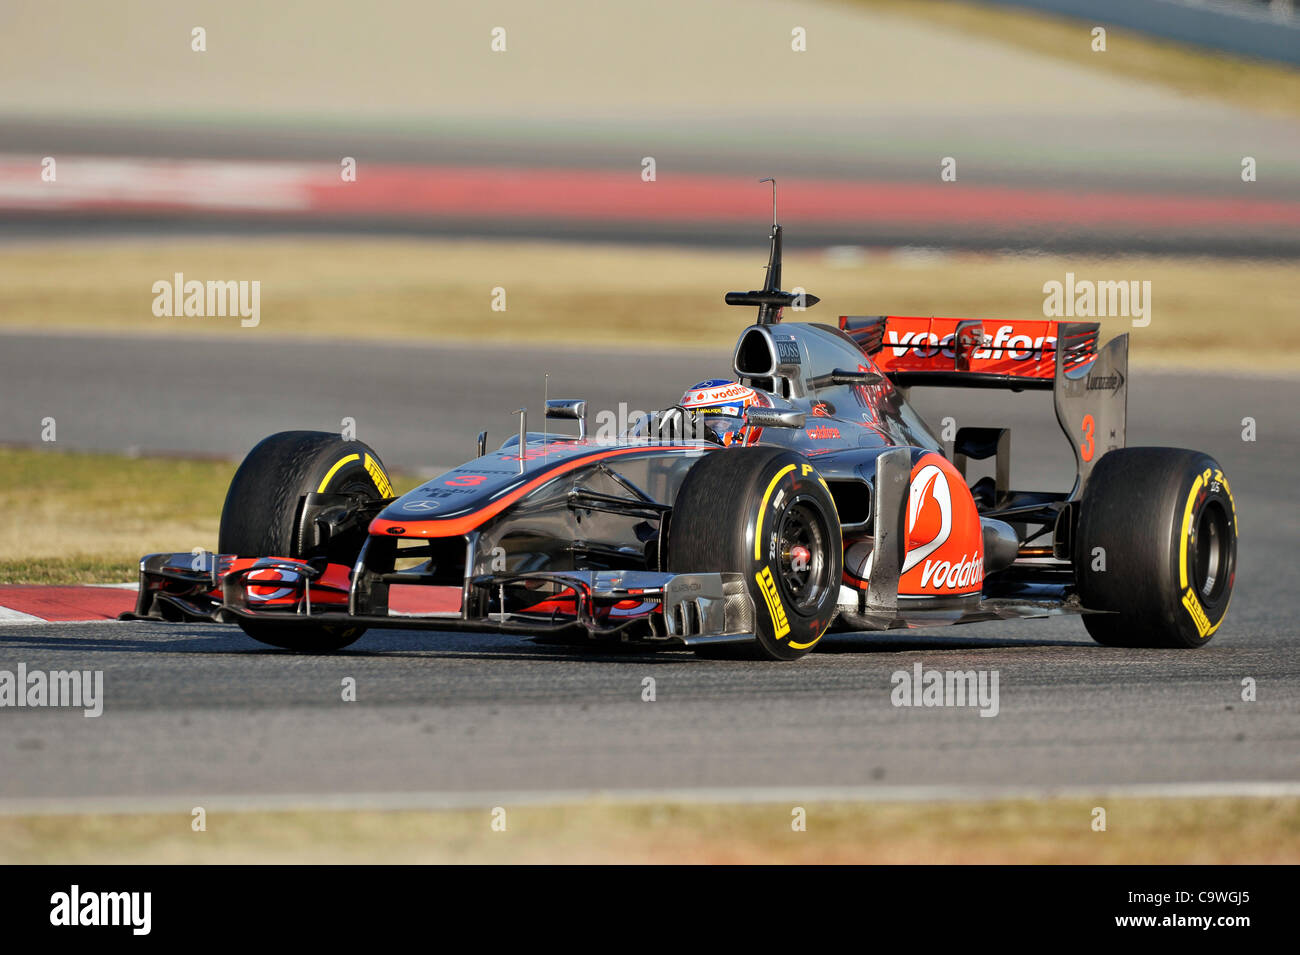 Jenson Button (GBR) in the McLaren Mercedes  MP4-27 during Formula One testing sessions on Circuito Catalunya, Spain Stock Photo